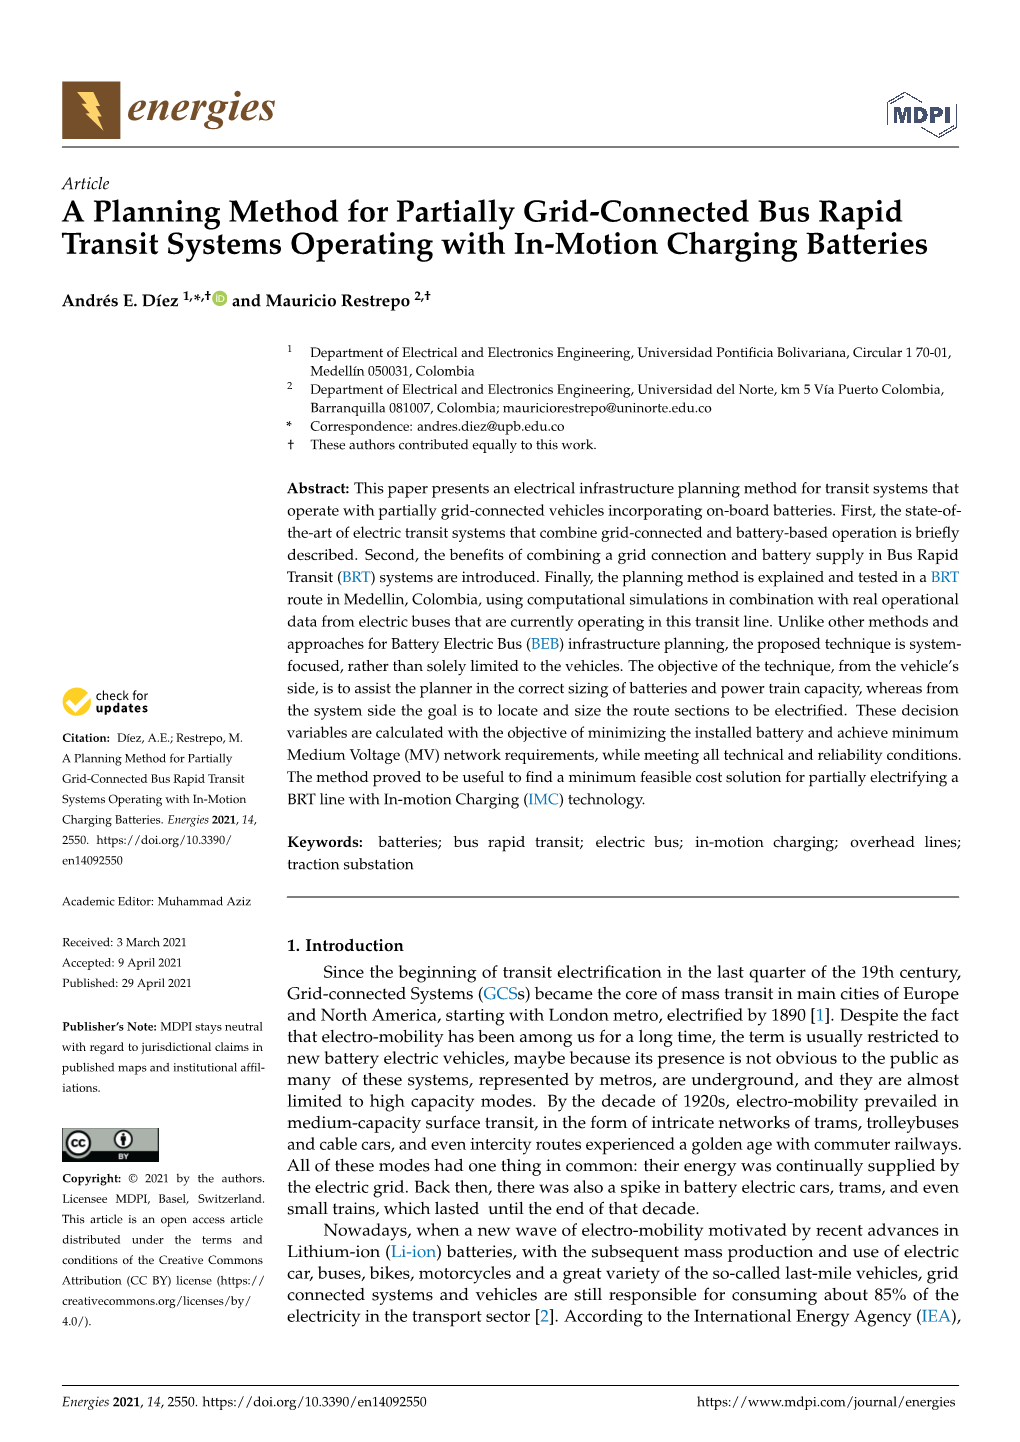 A Planning Method for Partially Grid-Connected Bus Rapid Transit Systems Operating with In-Motion Charging Batteries